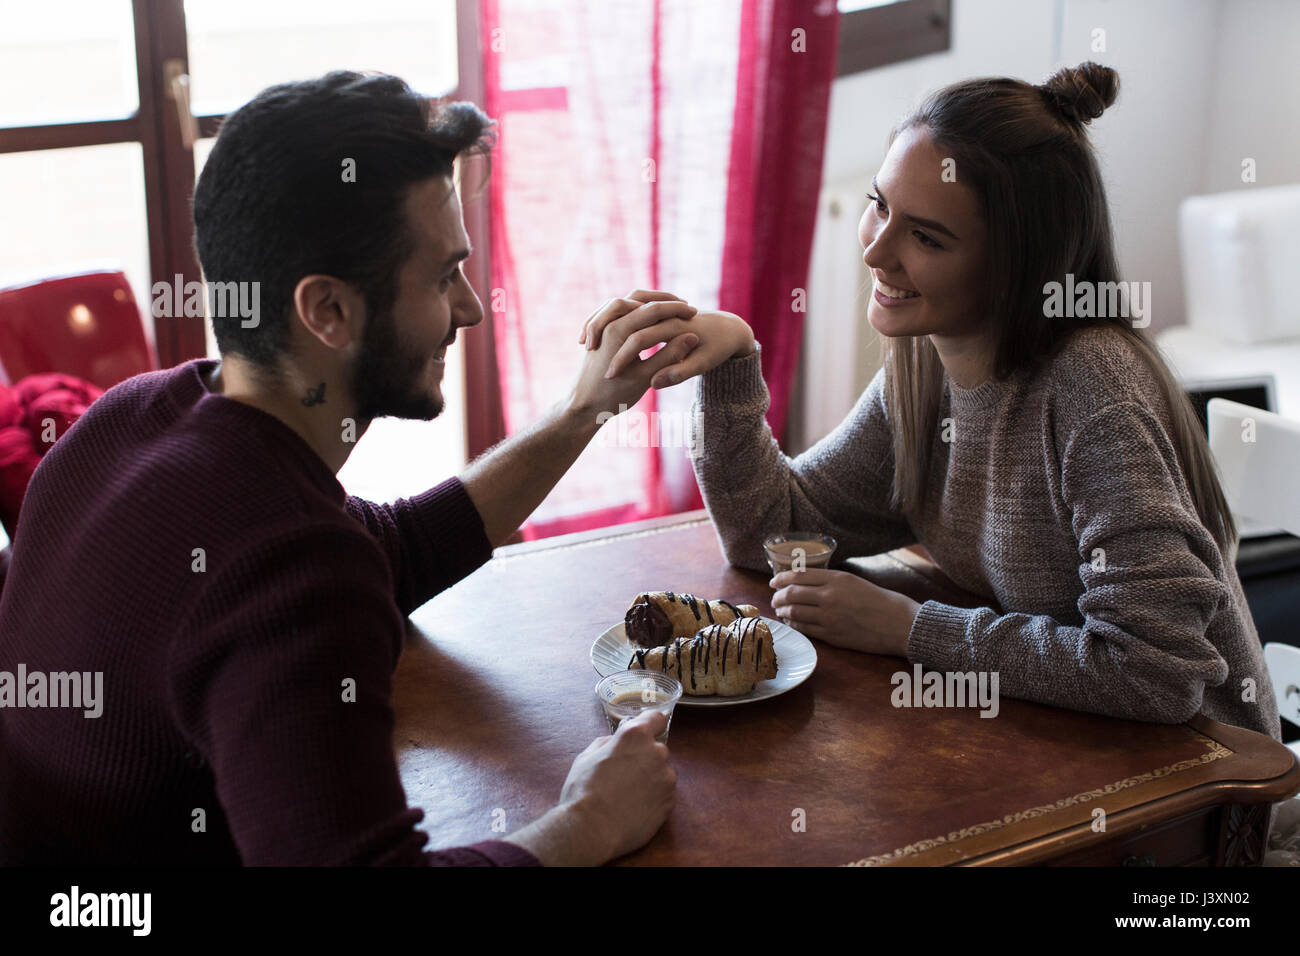 Couple sitting at table holding hands, drinking coffee Stock Photo